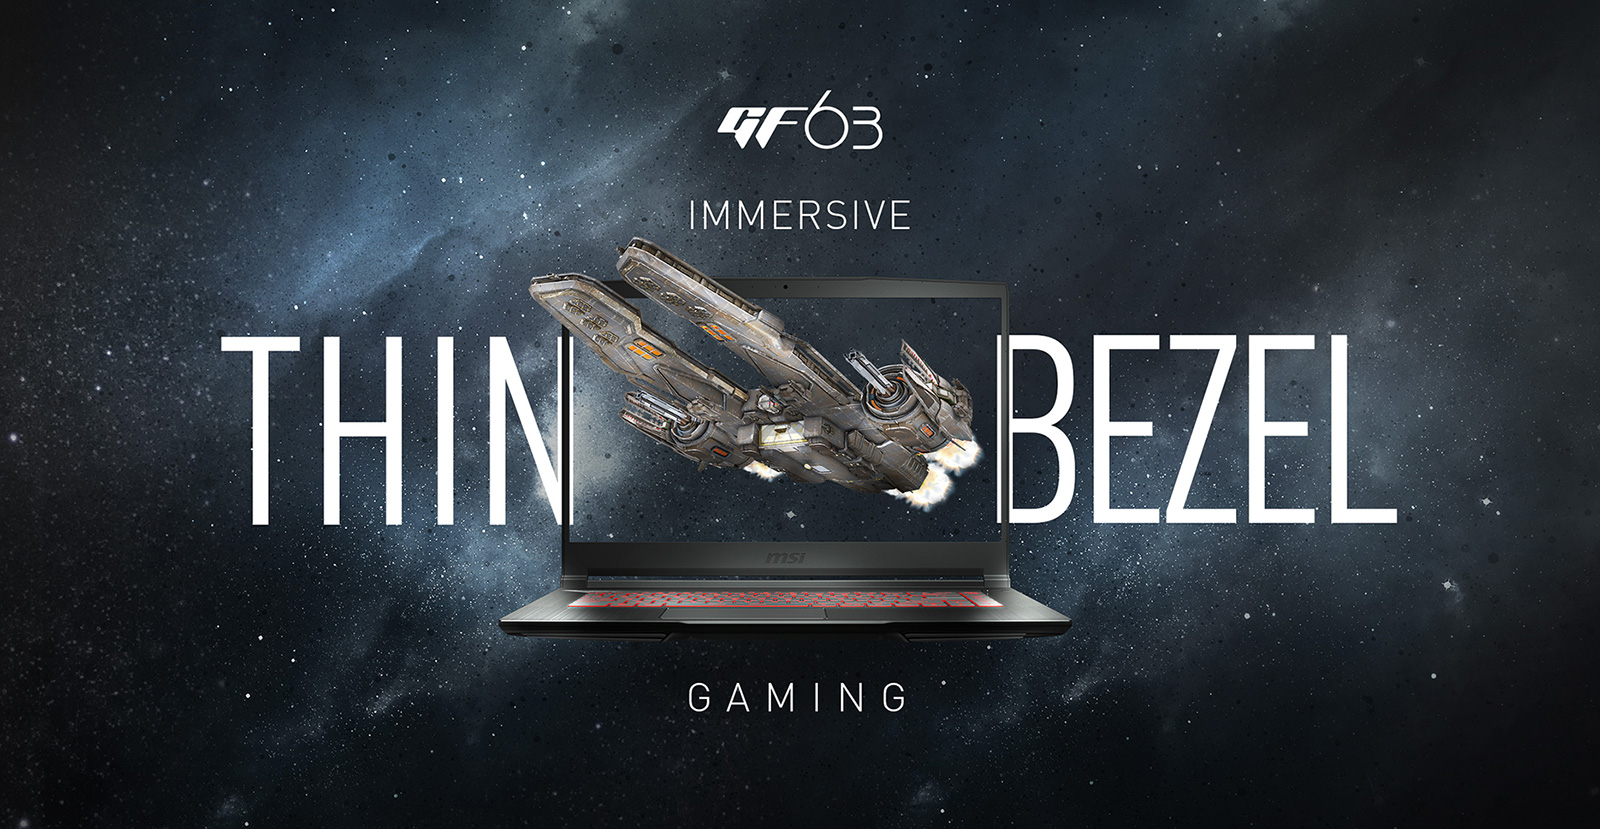 Gigabyte GF63 Gaming Laptop Open and Facing Forward and Its Screen Blending in with the Background of a spaceship flying up to the left in deep space. There is also text that reads: GF63 - IMMERSIVE THIN BEZEL GAMING